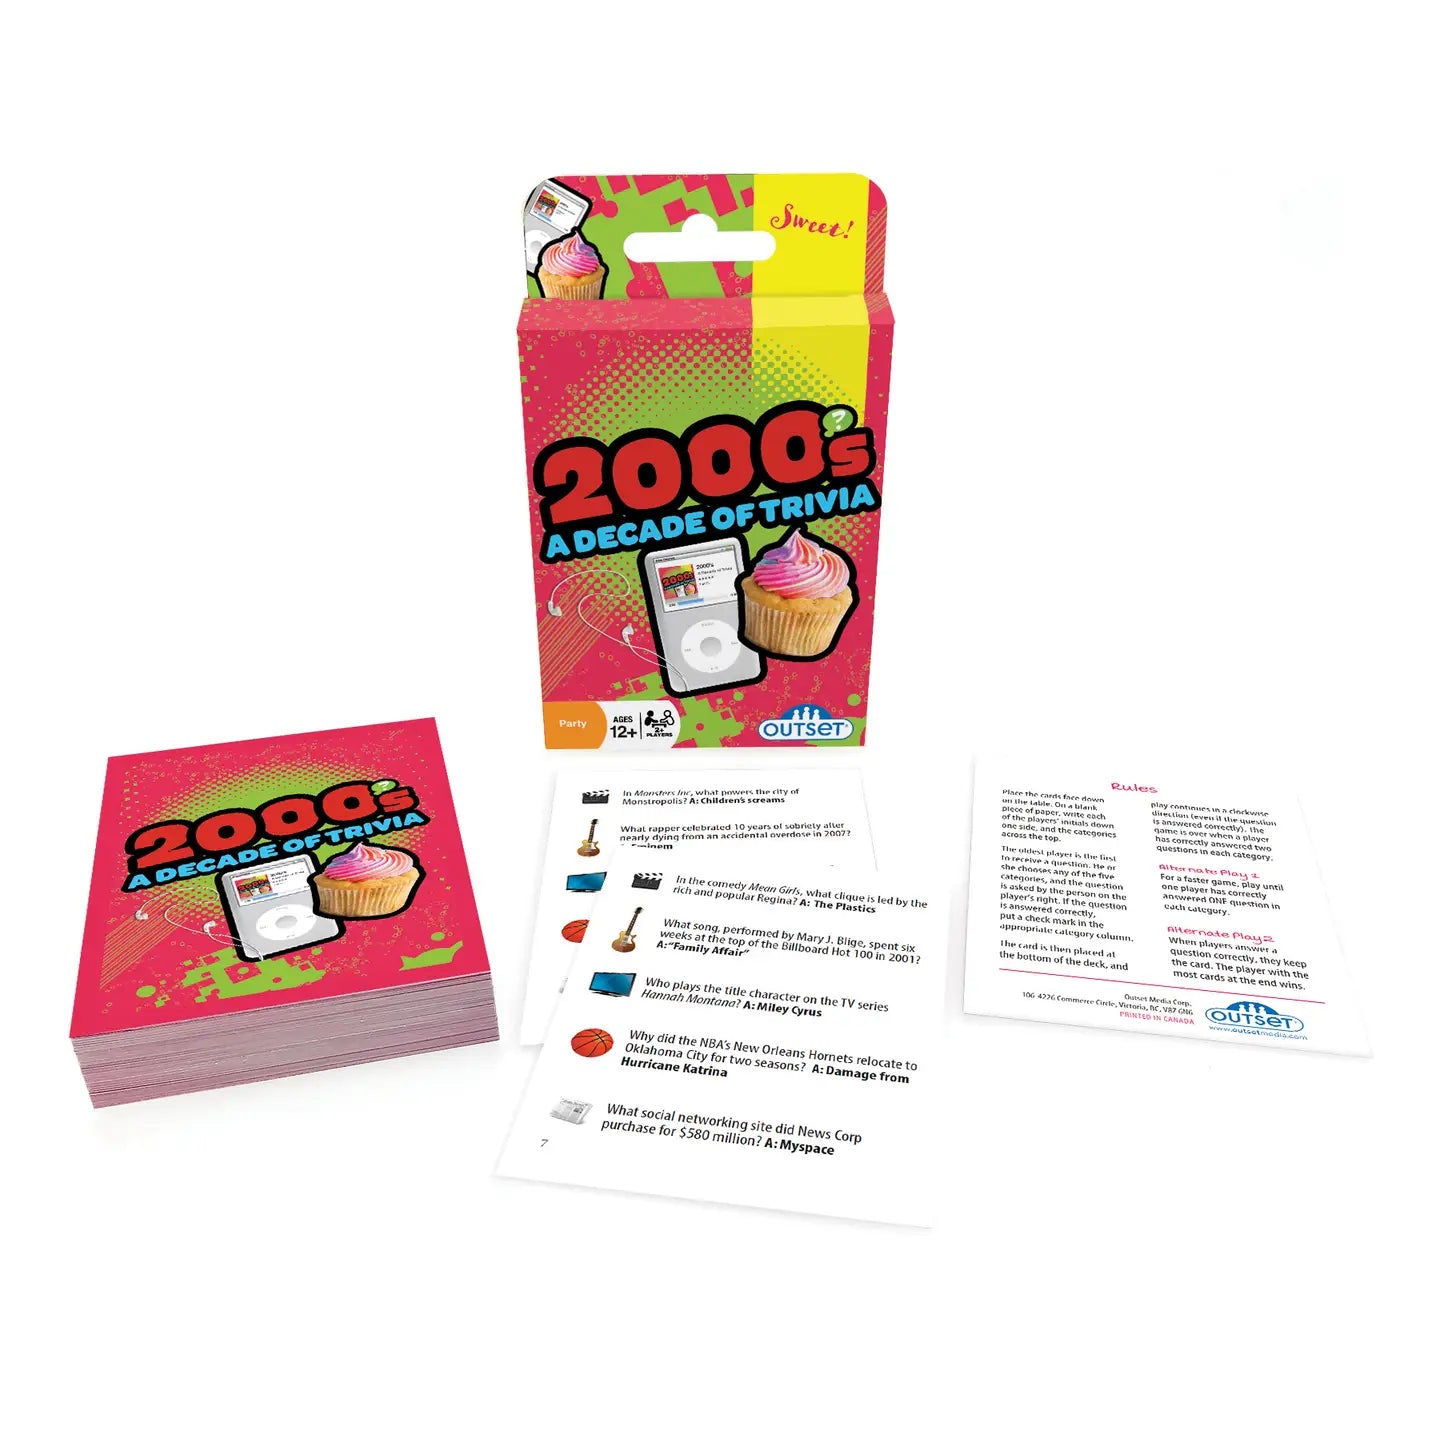 2000s - A Decade of Trivia Card Game